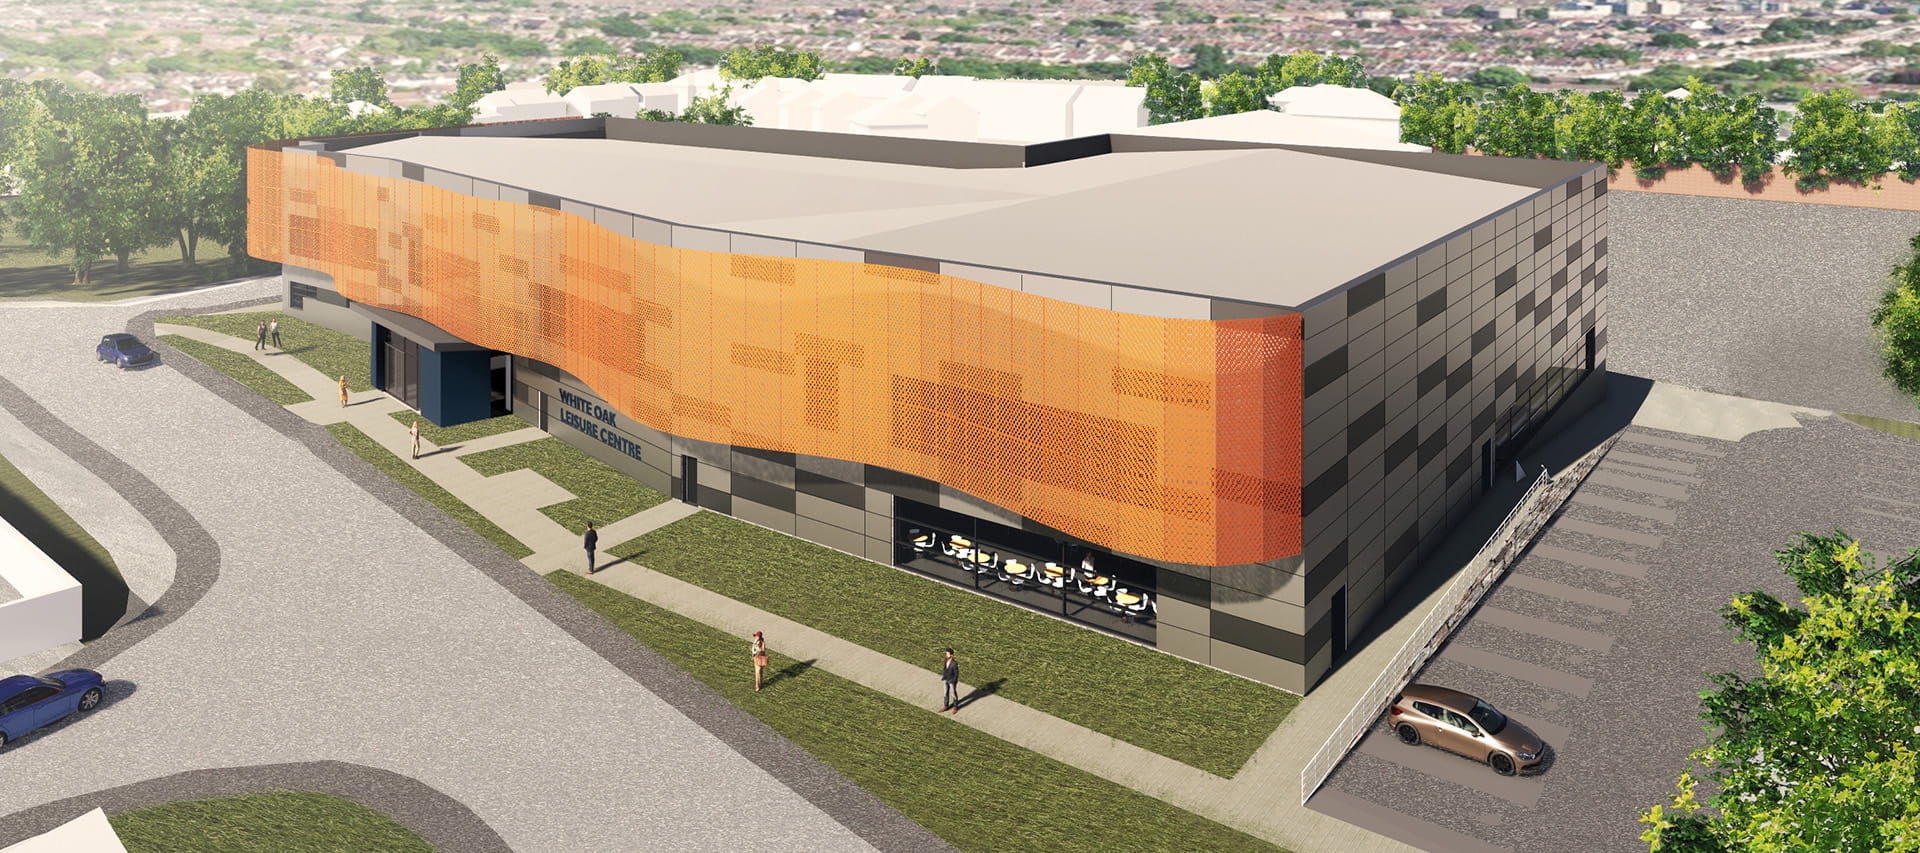 Architect's image of a leisure centre with lawn ISG Ltd